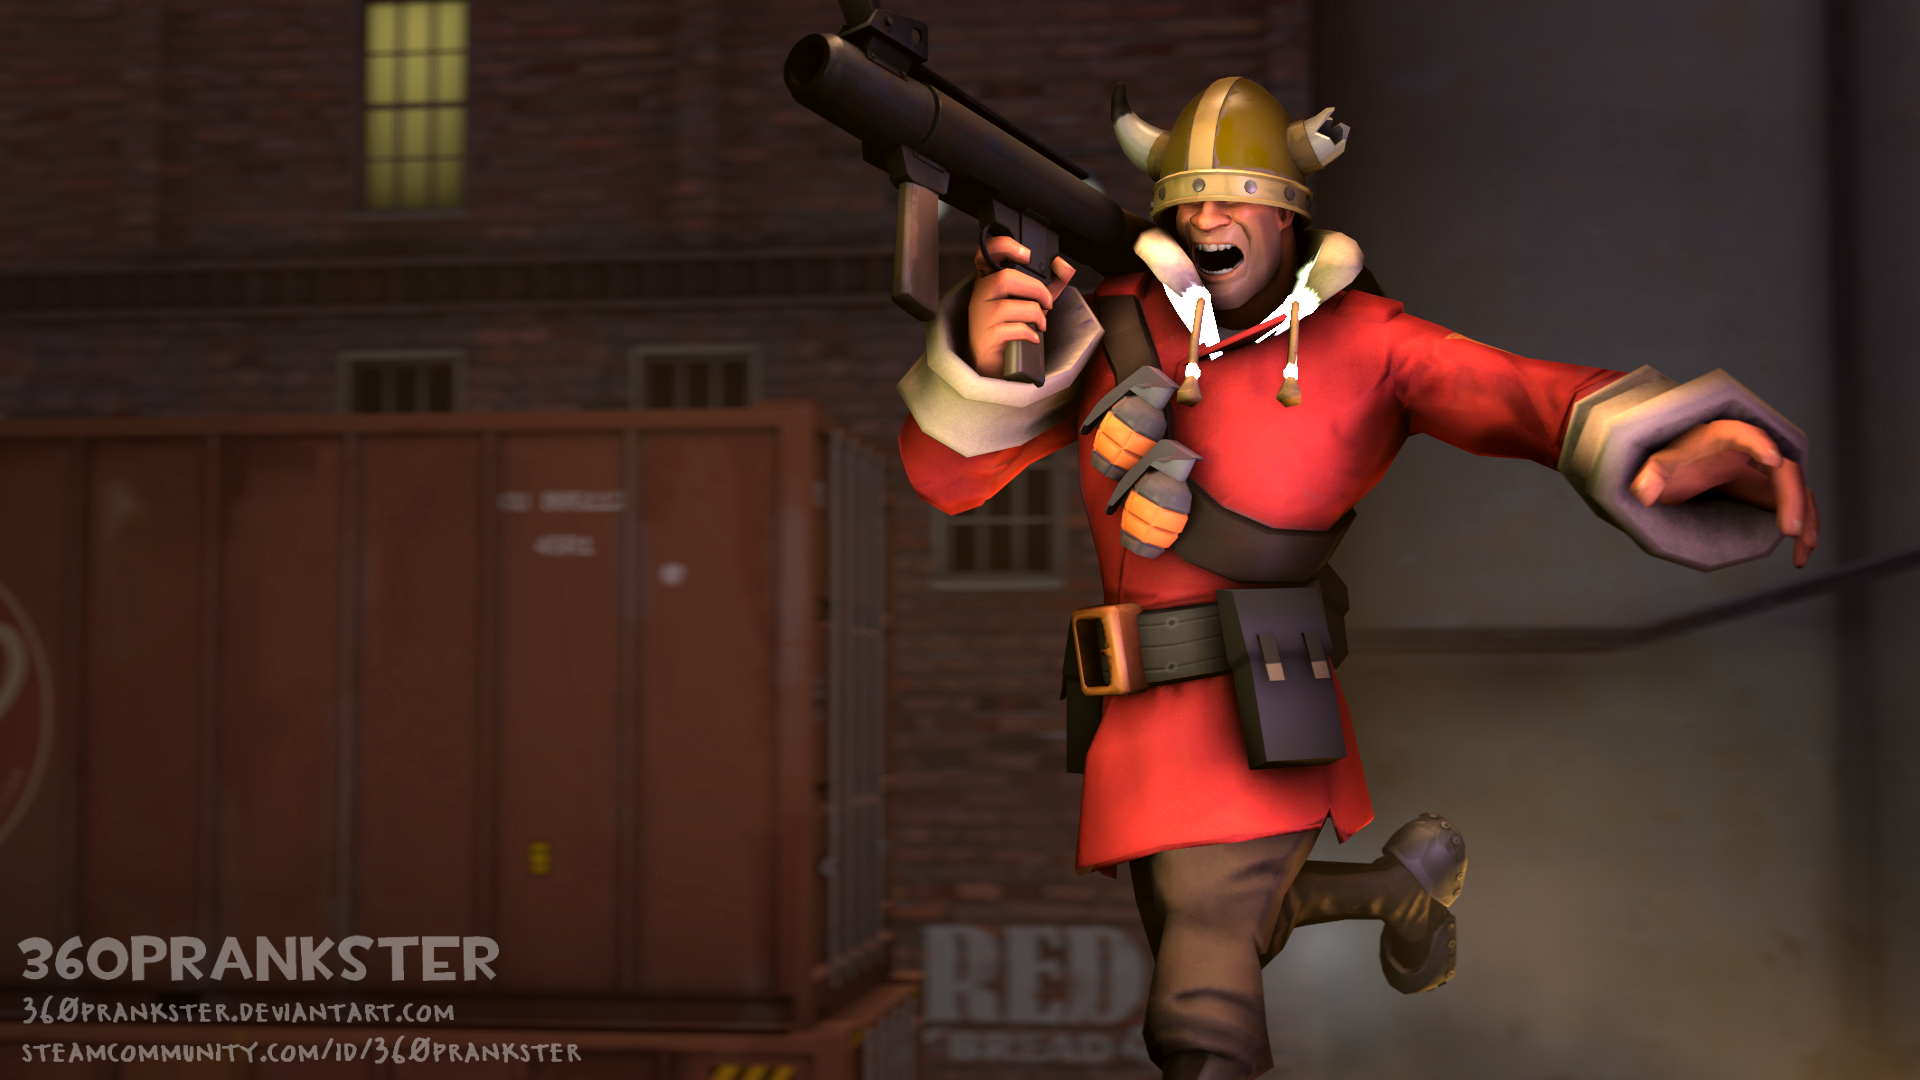 Sfm Tf2 Loadout Soldier Ignistf2 By 360prankster On